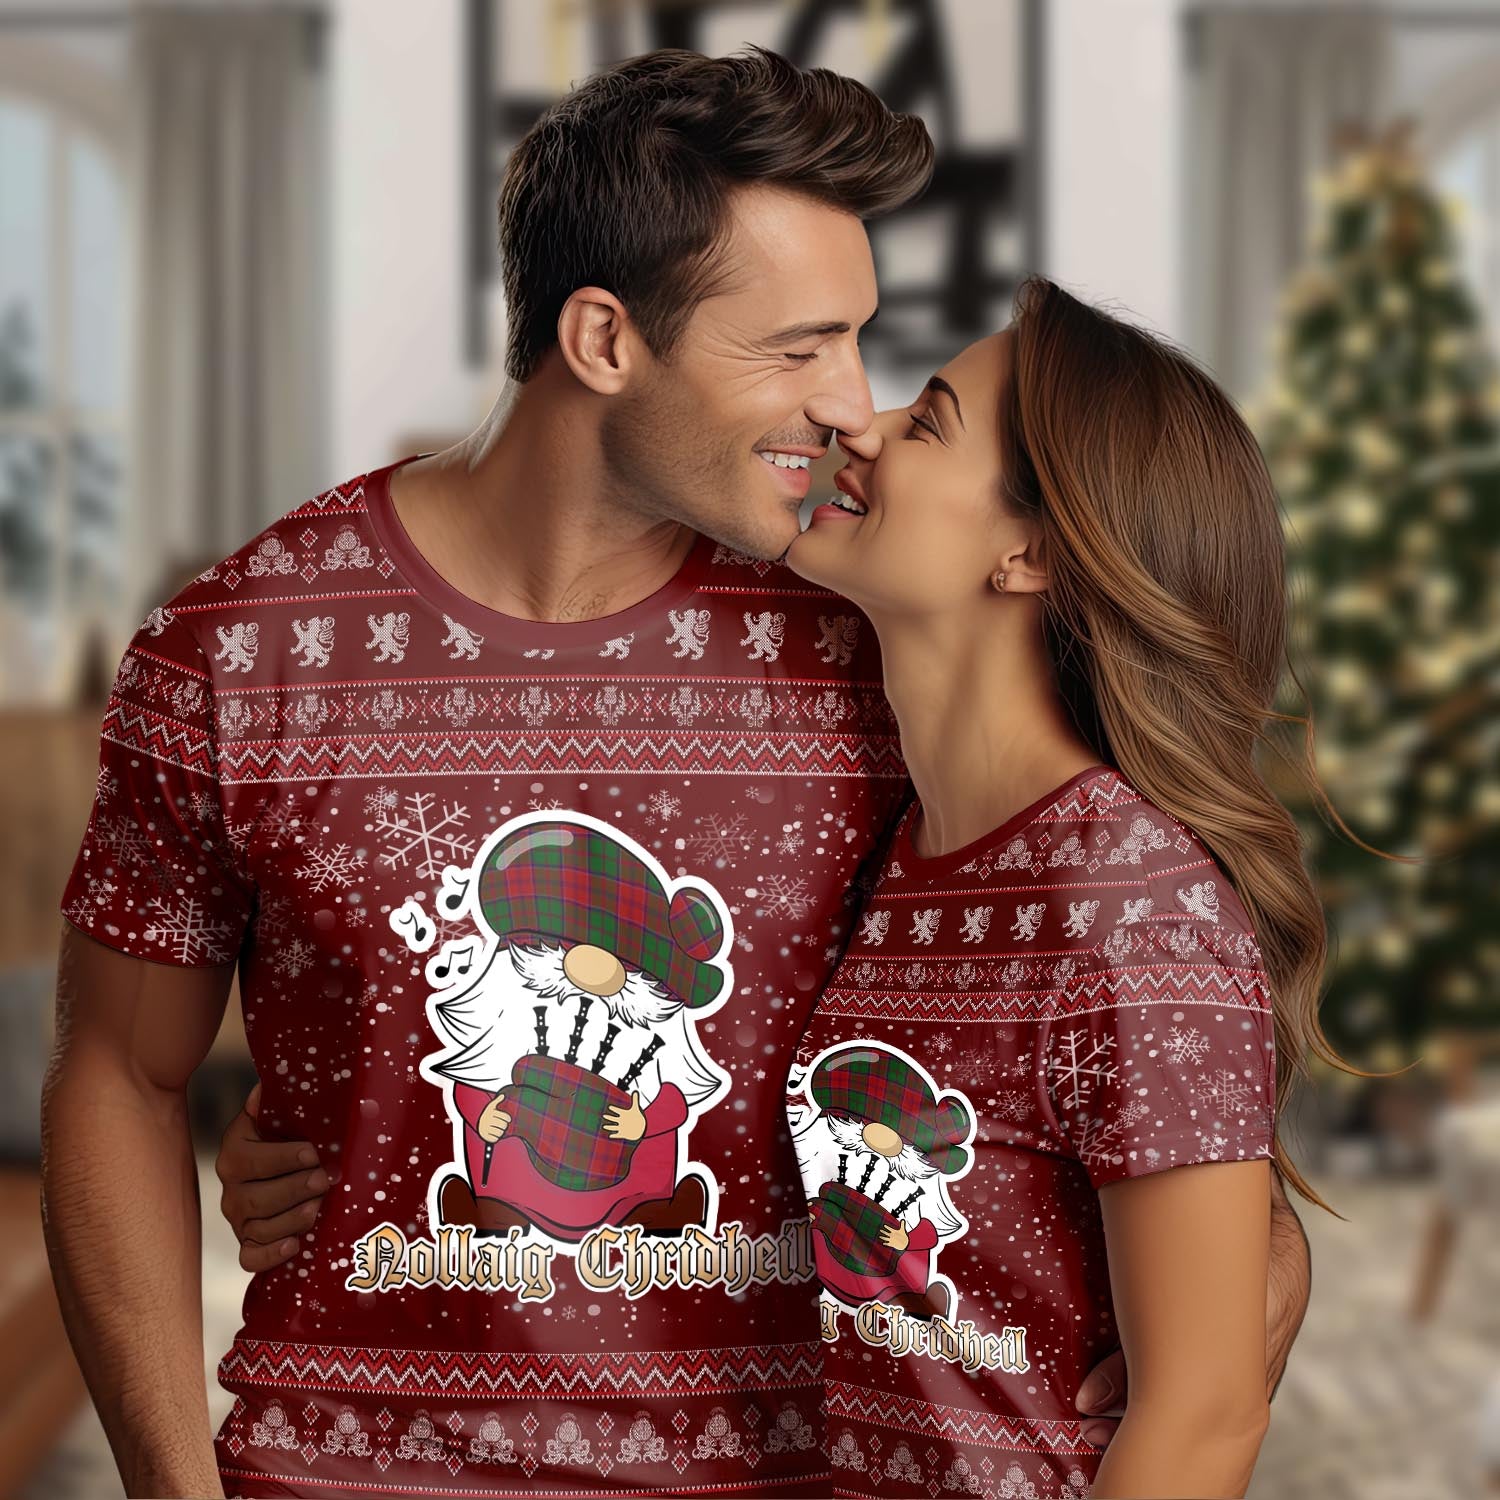 Grant Clan Christmas Family T-Shirt with Funny Gnome Playing Bagpipes Women's Shirt Red - Tartanvibesclothing